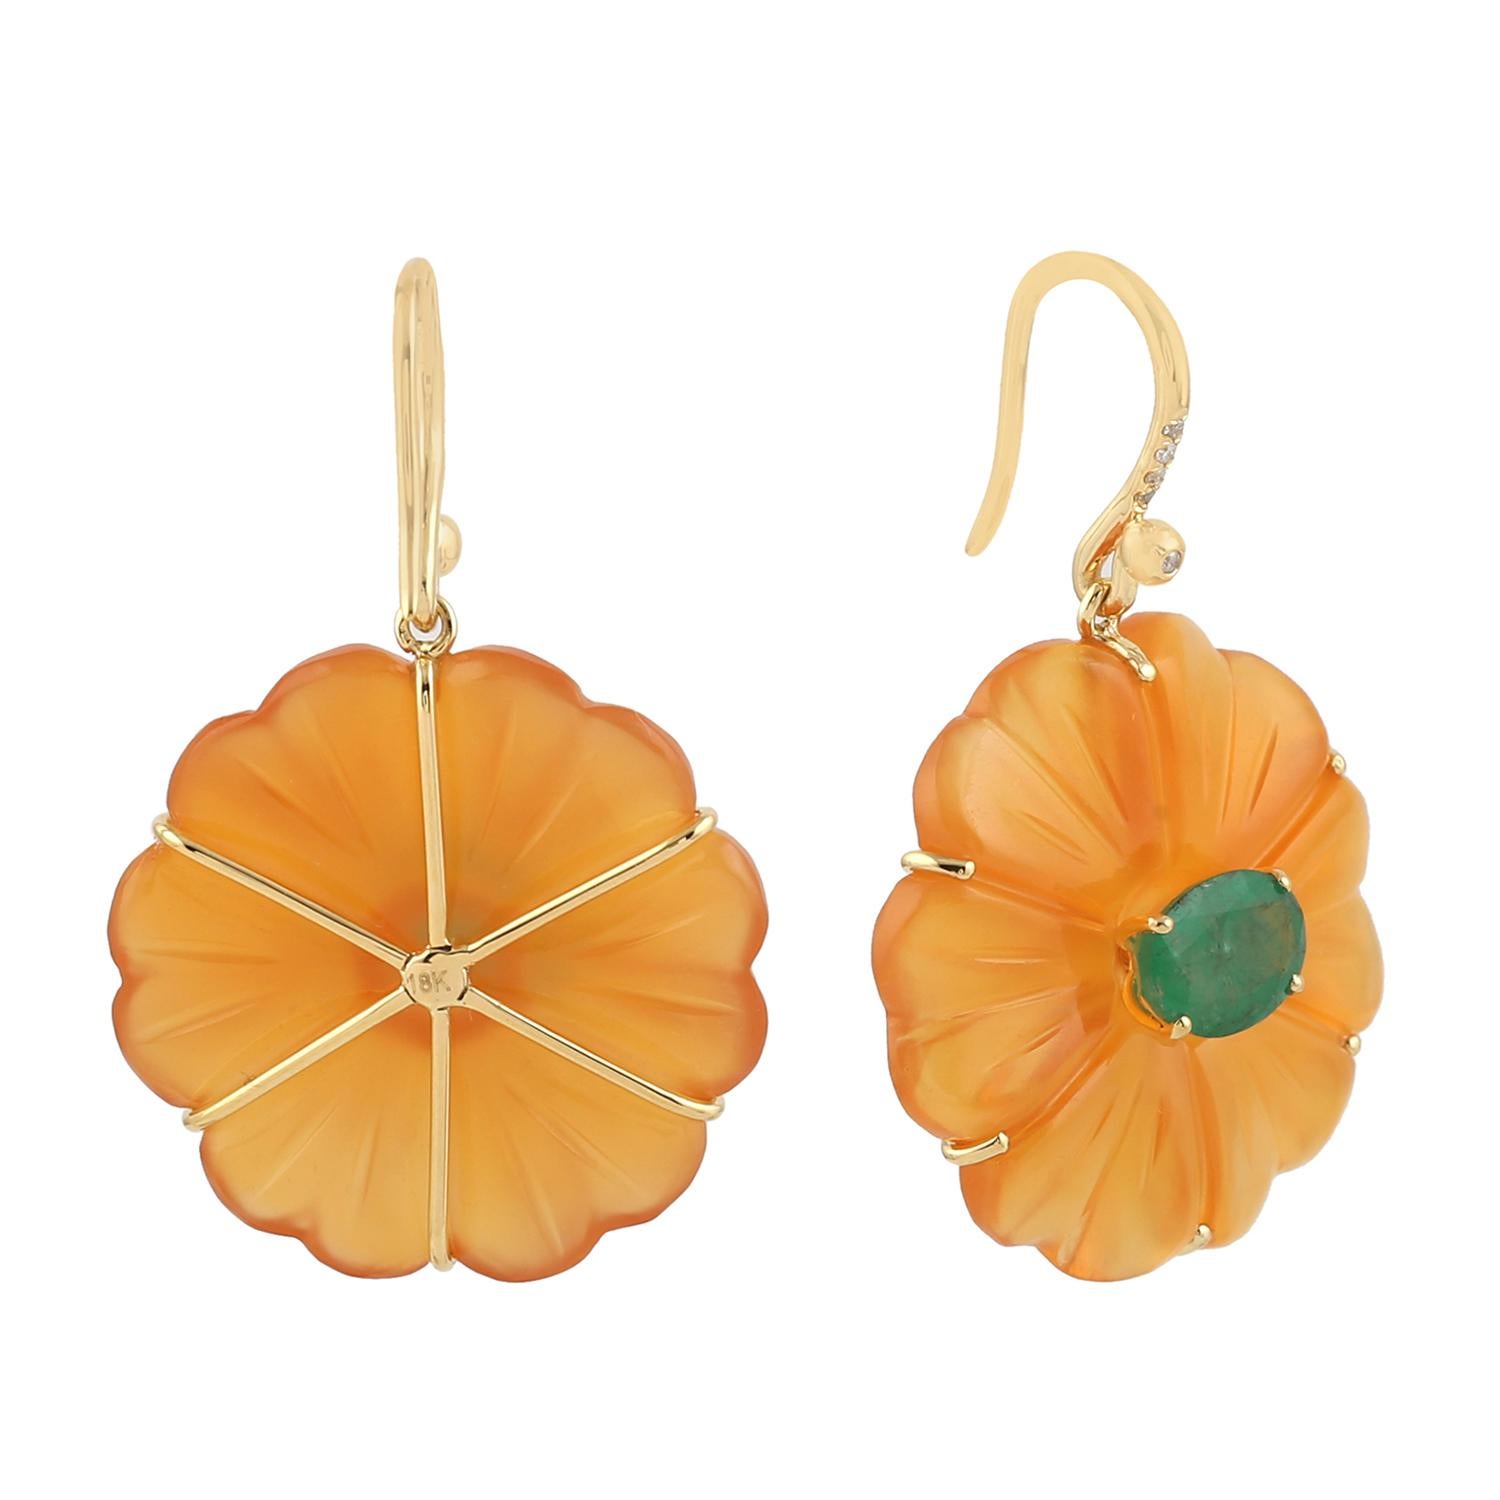 Cast in 18-karat gold. These beautiful earrings are set with 33.78 carats of carved onyx, 2.31 carats emerald and .05 carats of sparkling diamonds.  See other flower collection pieces.

FOLLOW  MEGHNA JEWELS storefront to view the latest collection